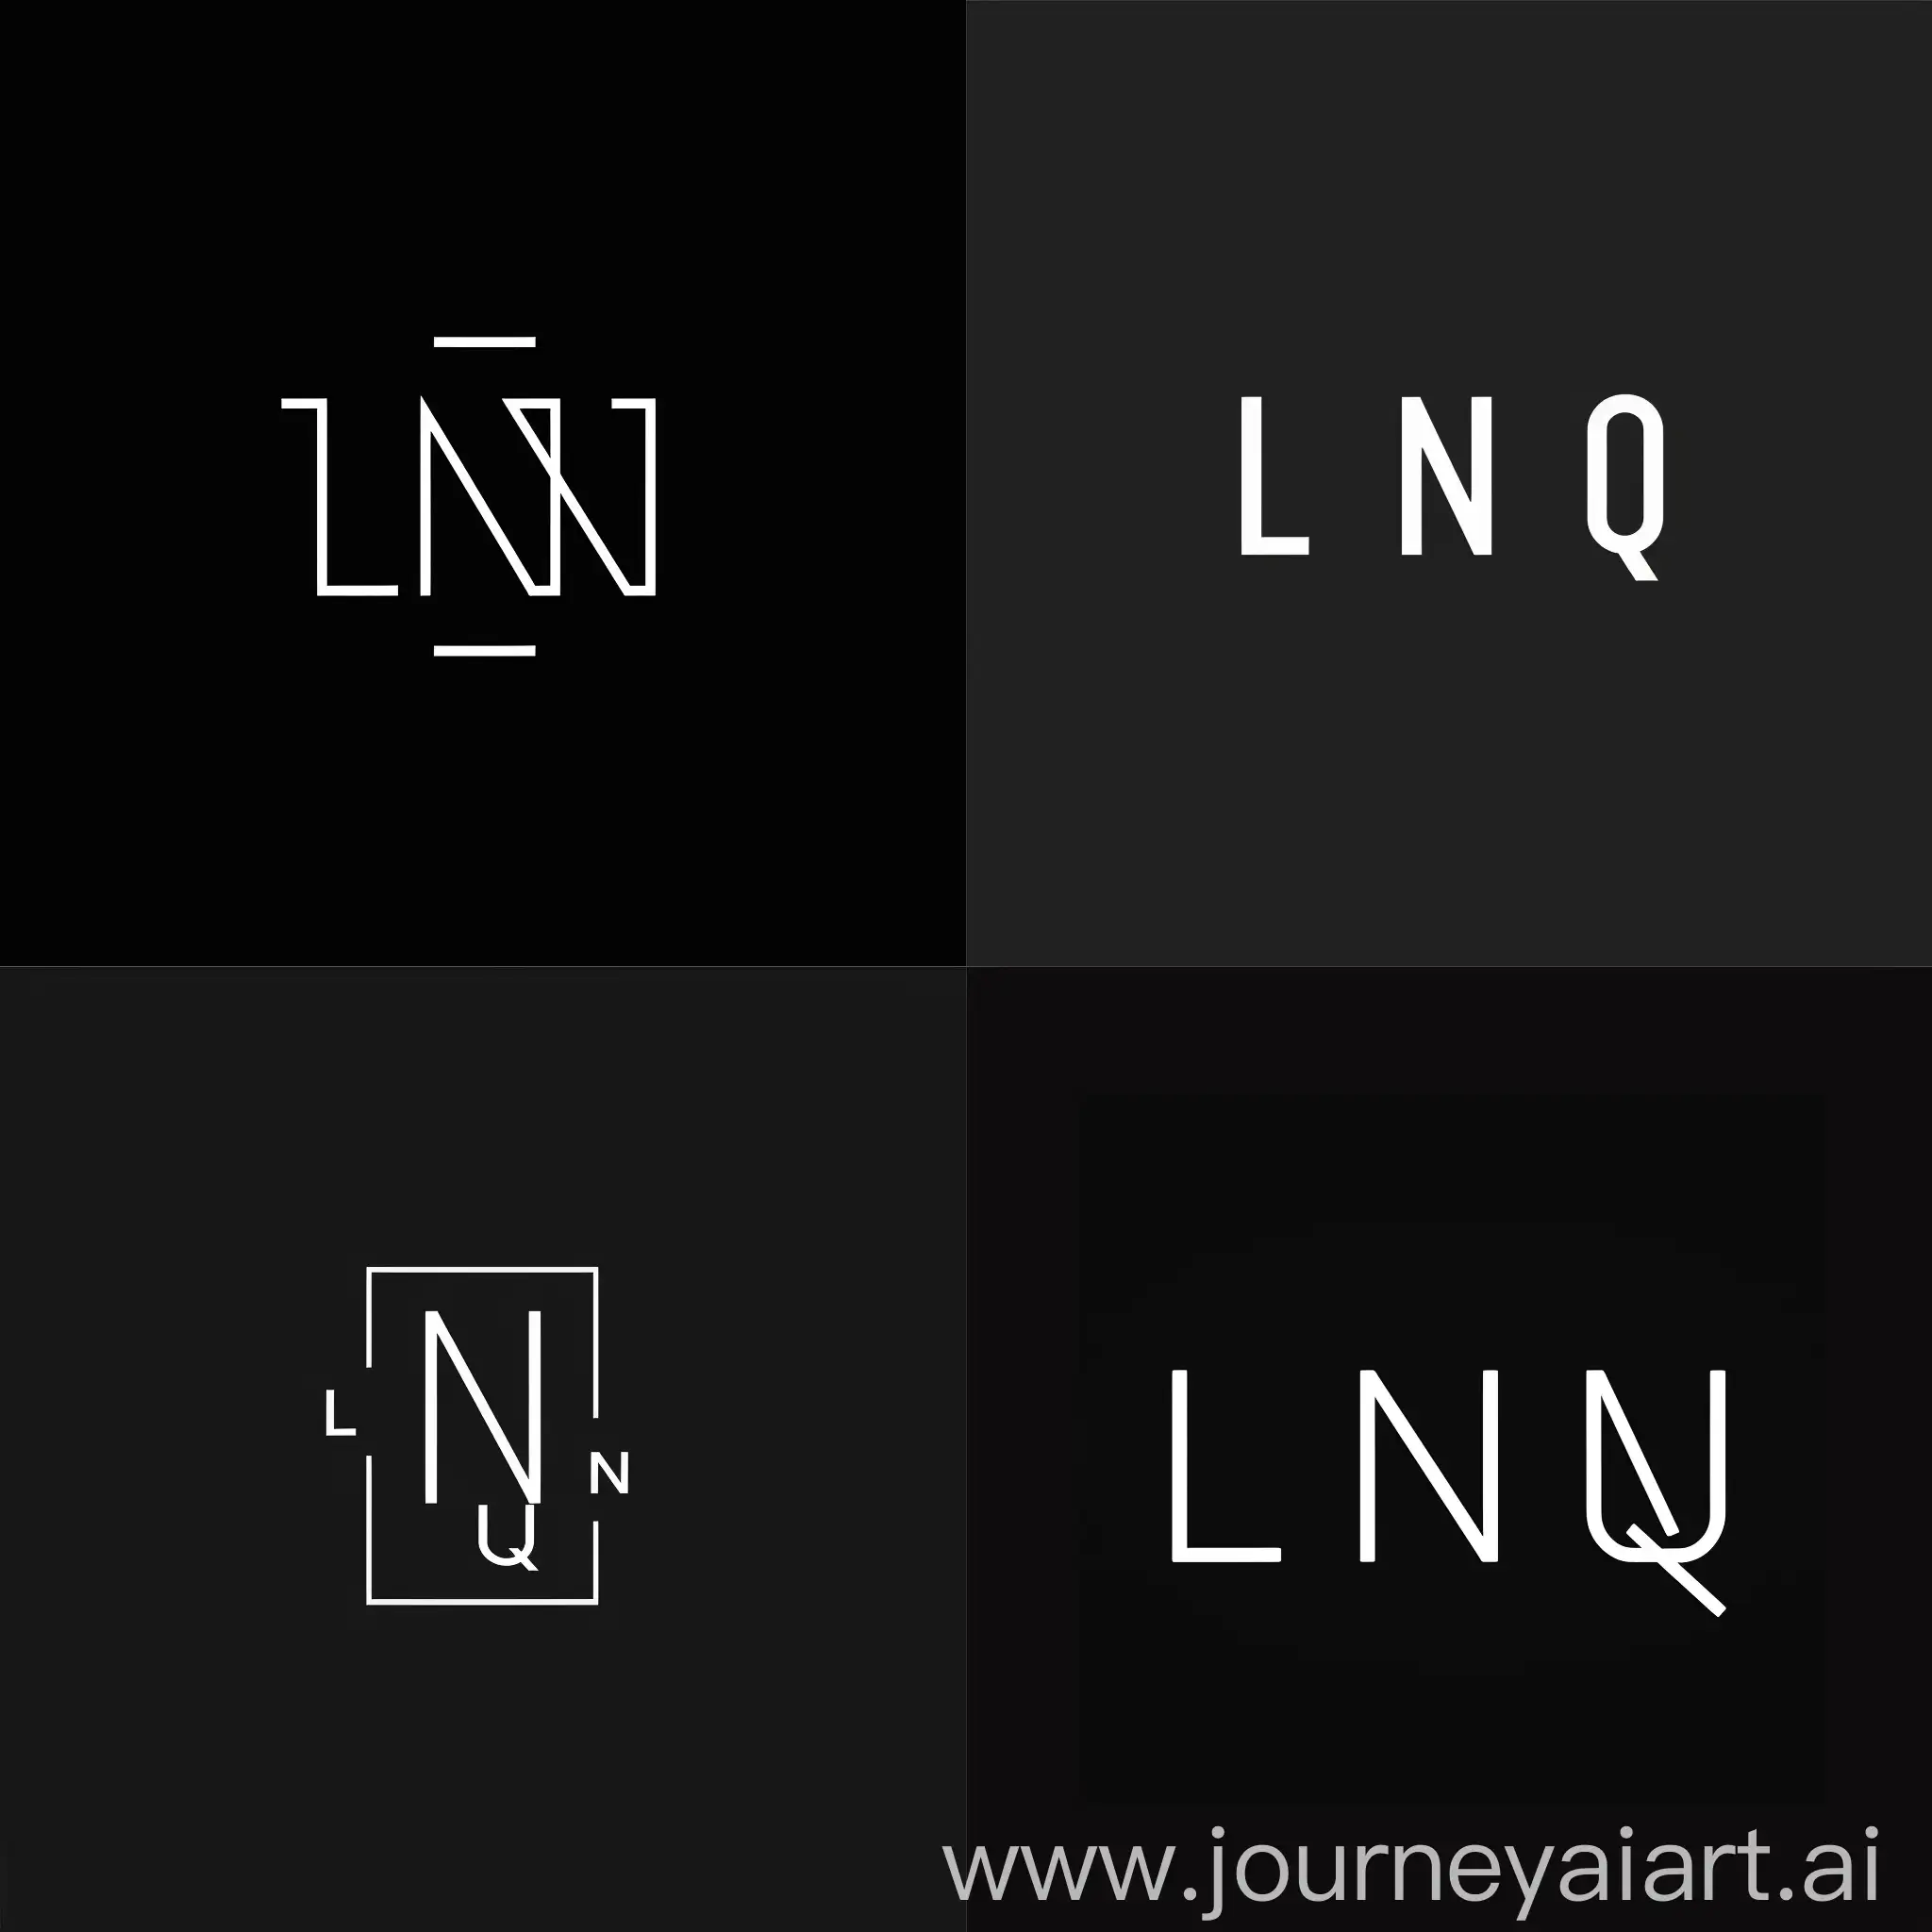 create a logo design for a digital watermark on social media content from the three letters [L,N,Q] to communicate content lyrics and quotes, clear background, simple lines but there must be continuity between the letters, be creative with font choices